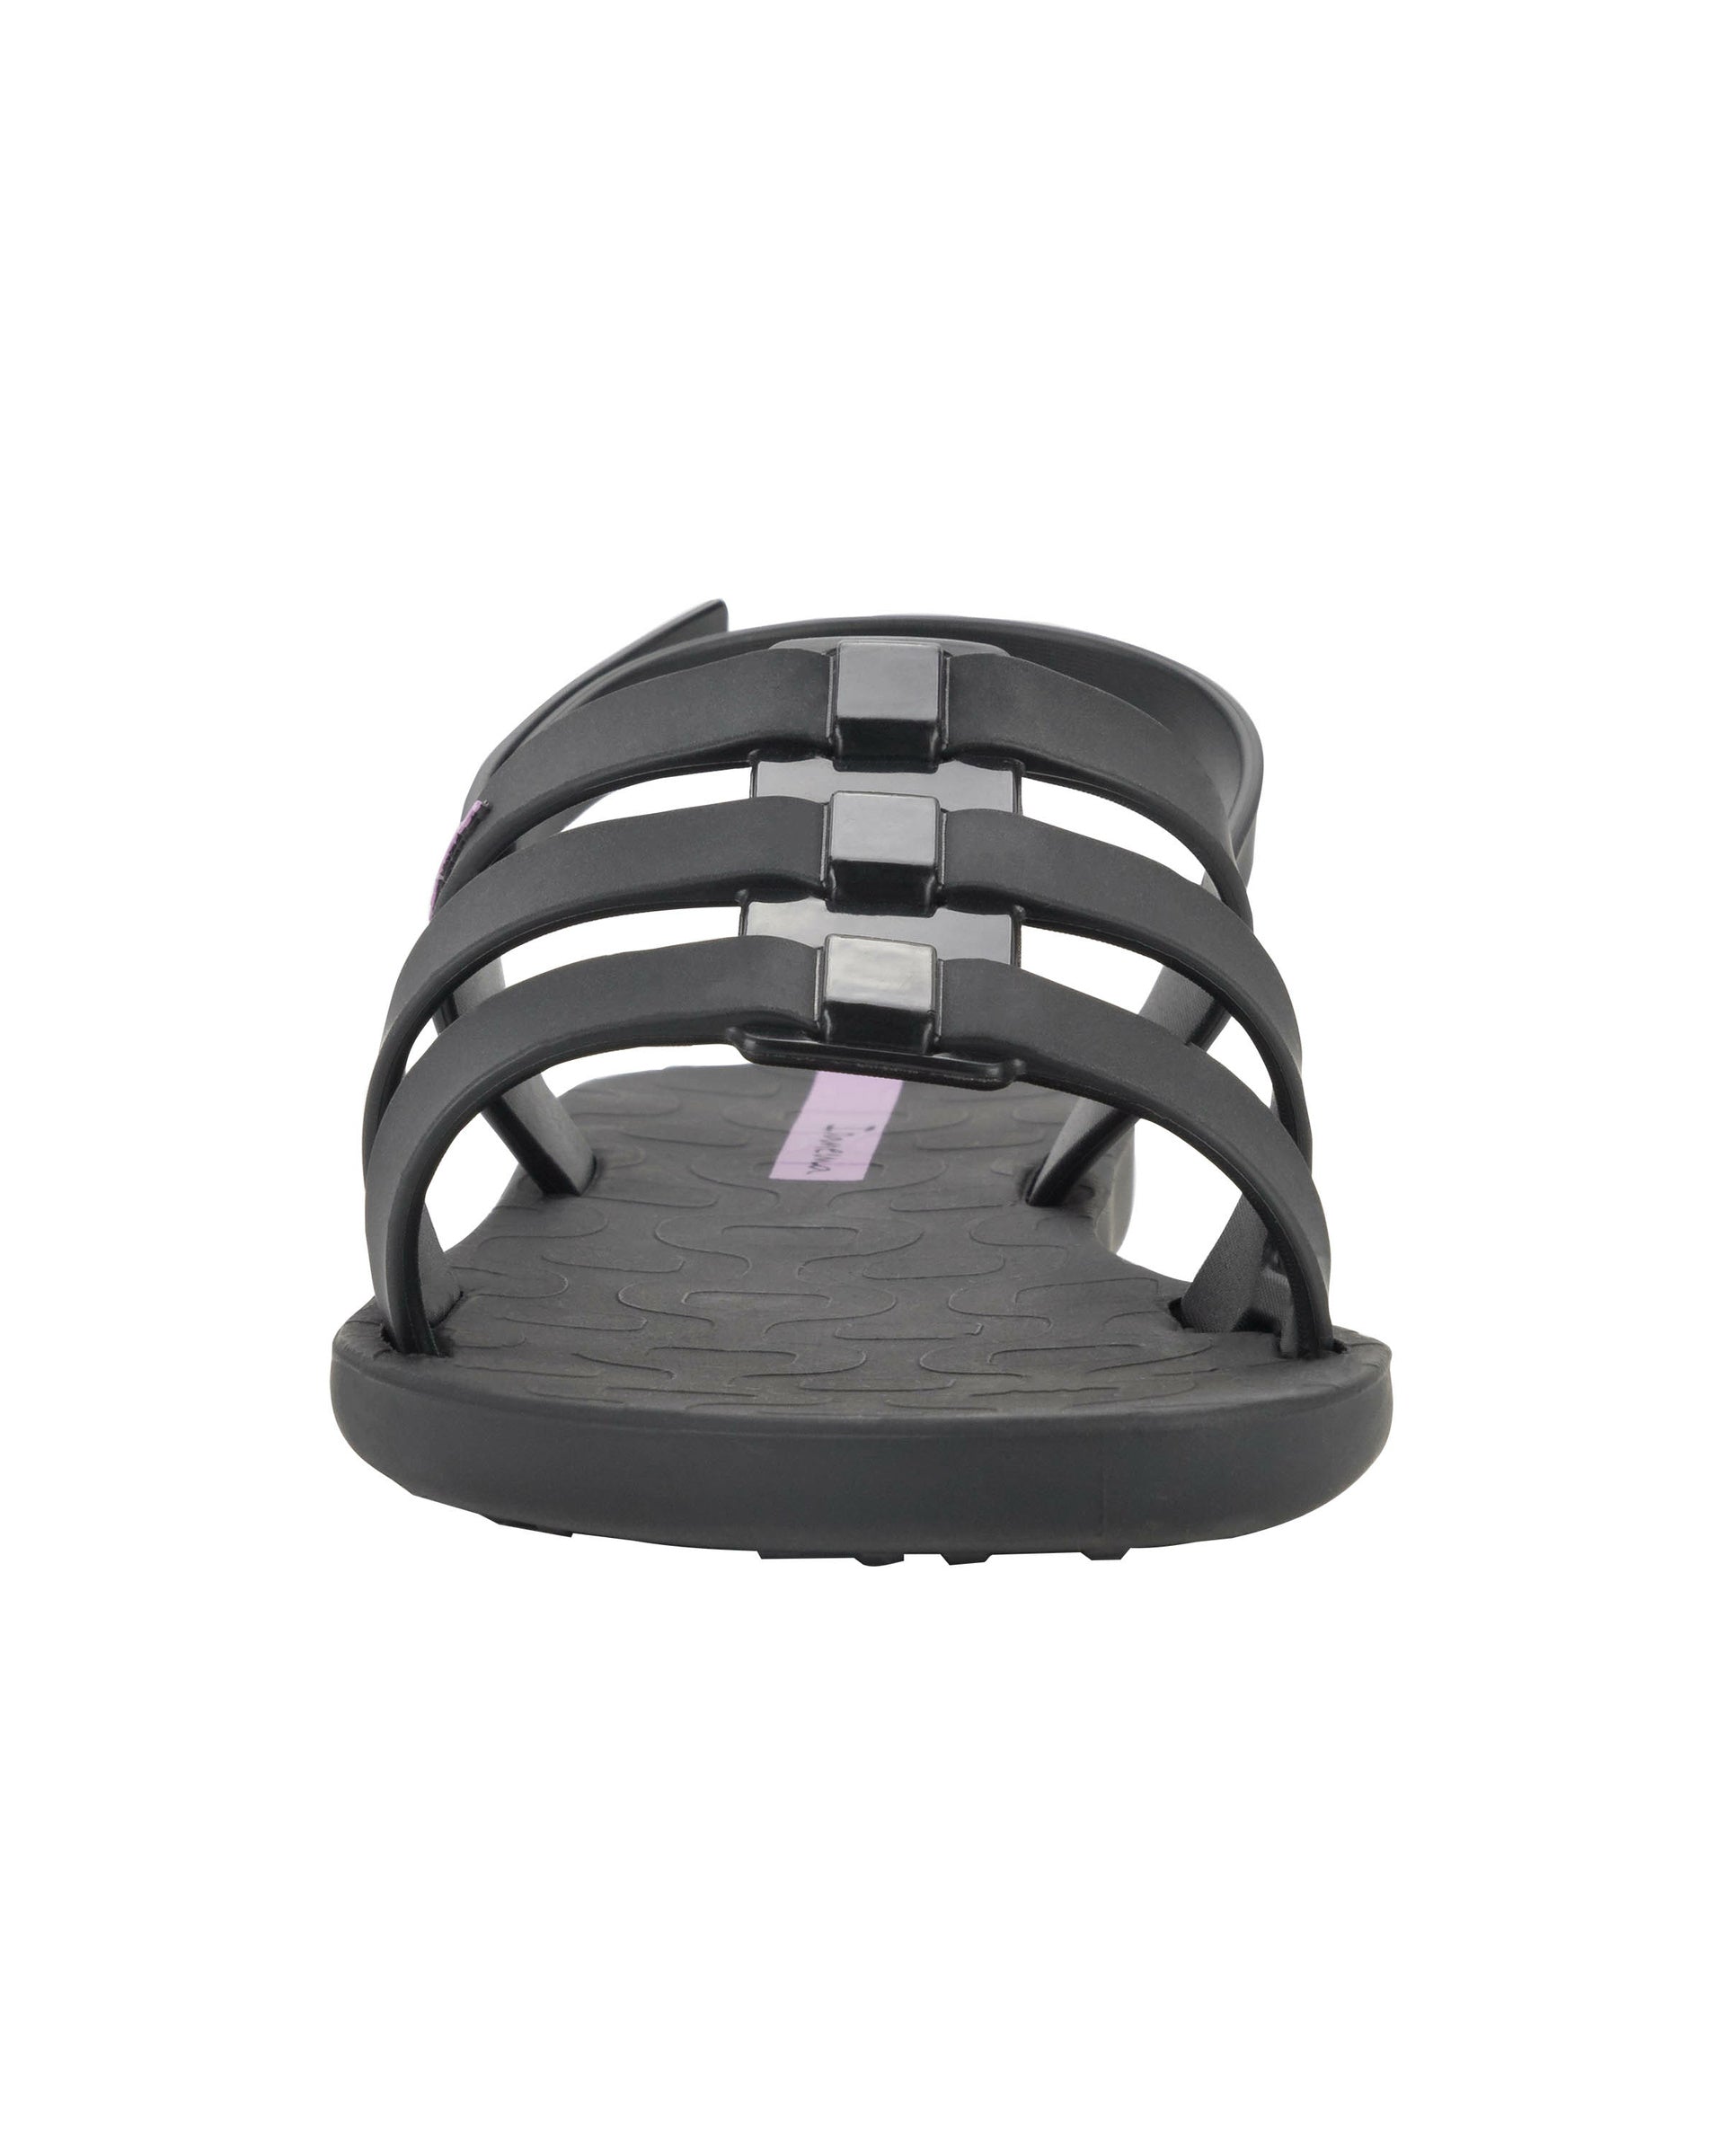 Front view of a black Ipanema Style women's sandal.